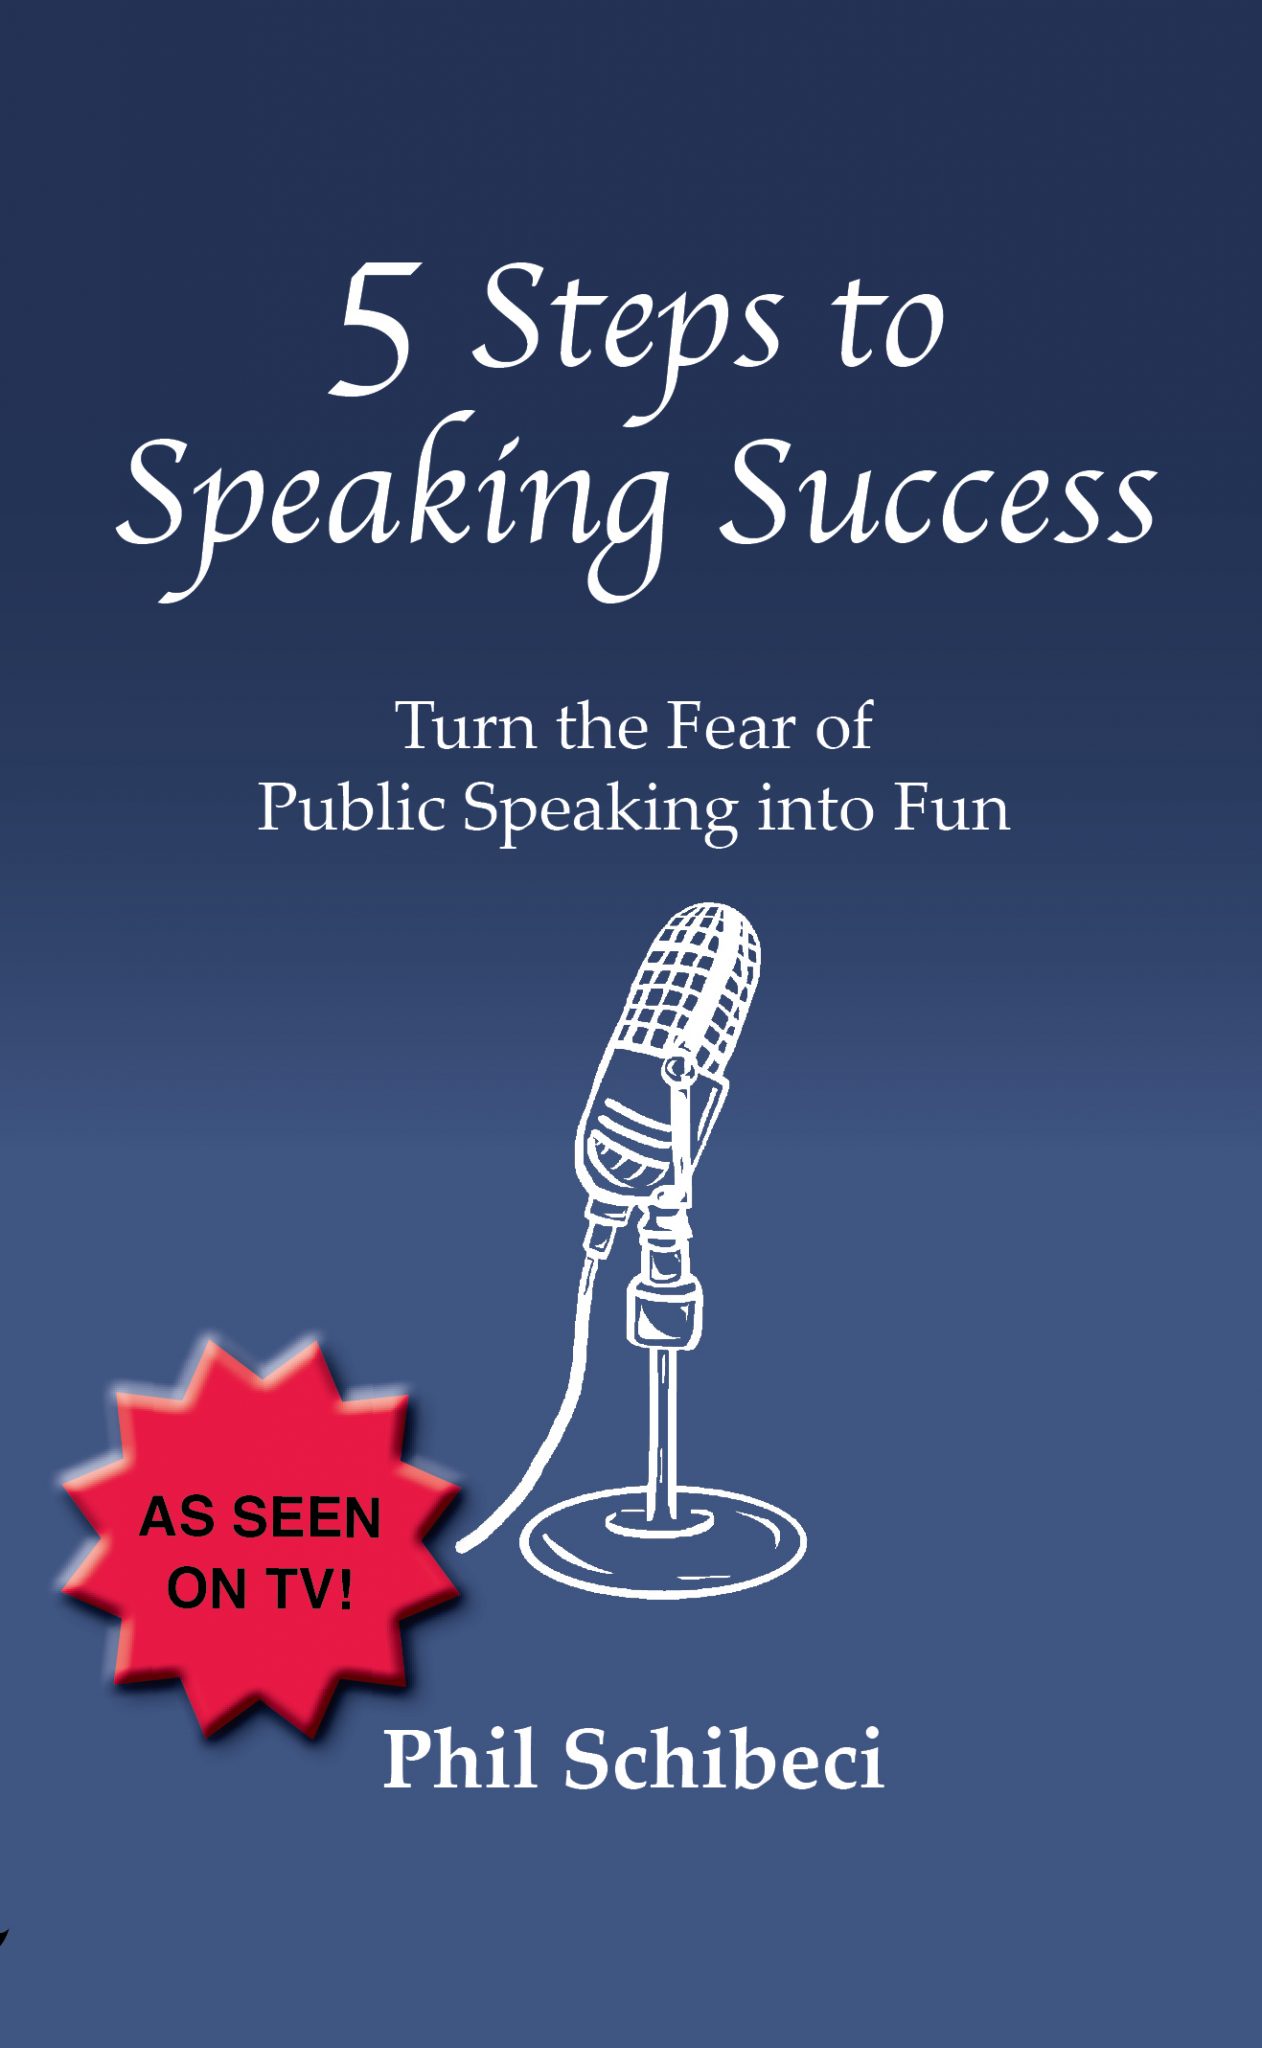 5 Steps to Speaking Success